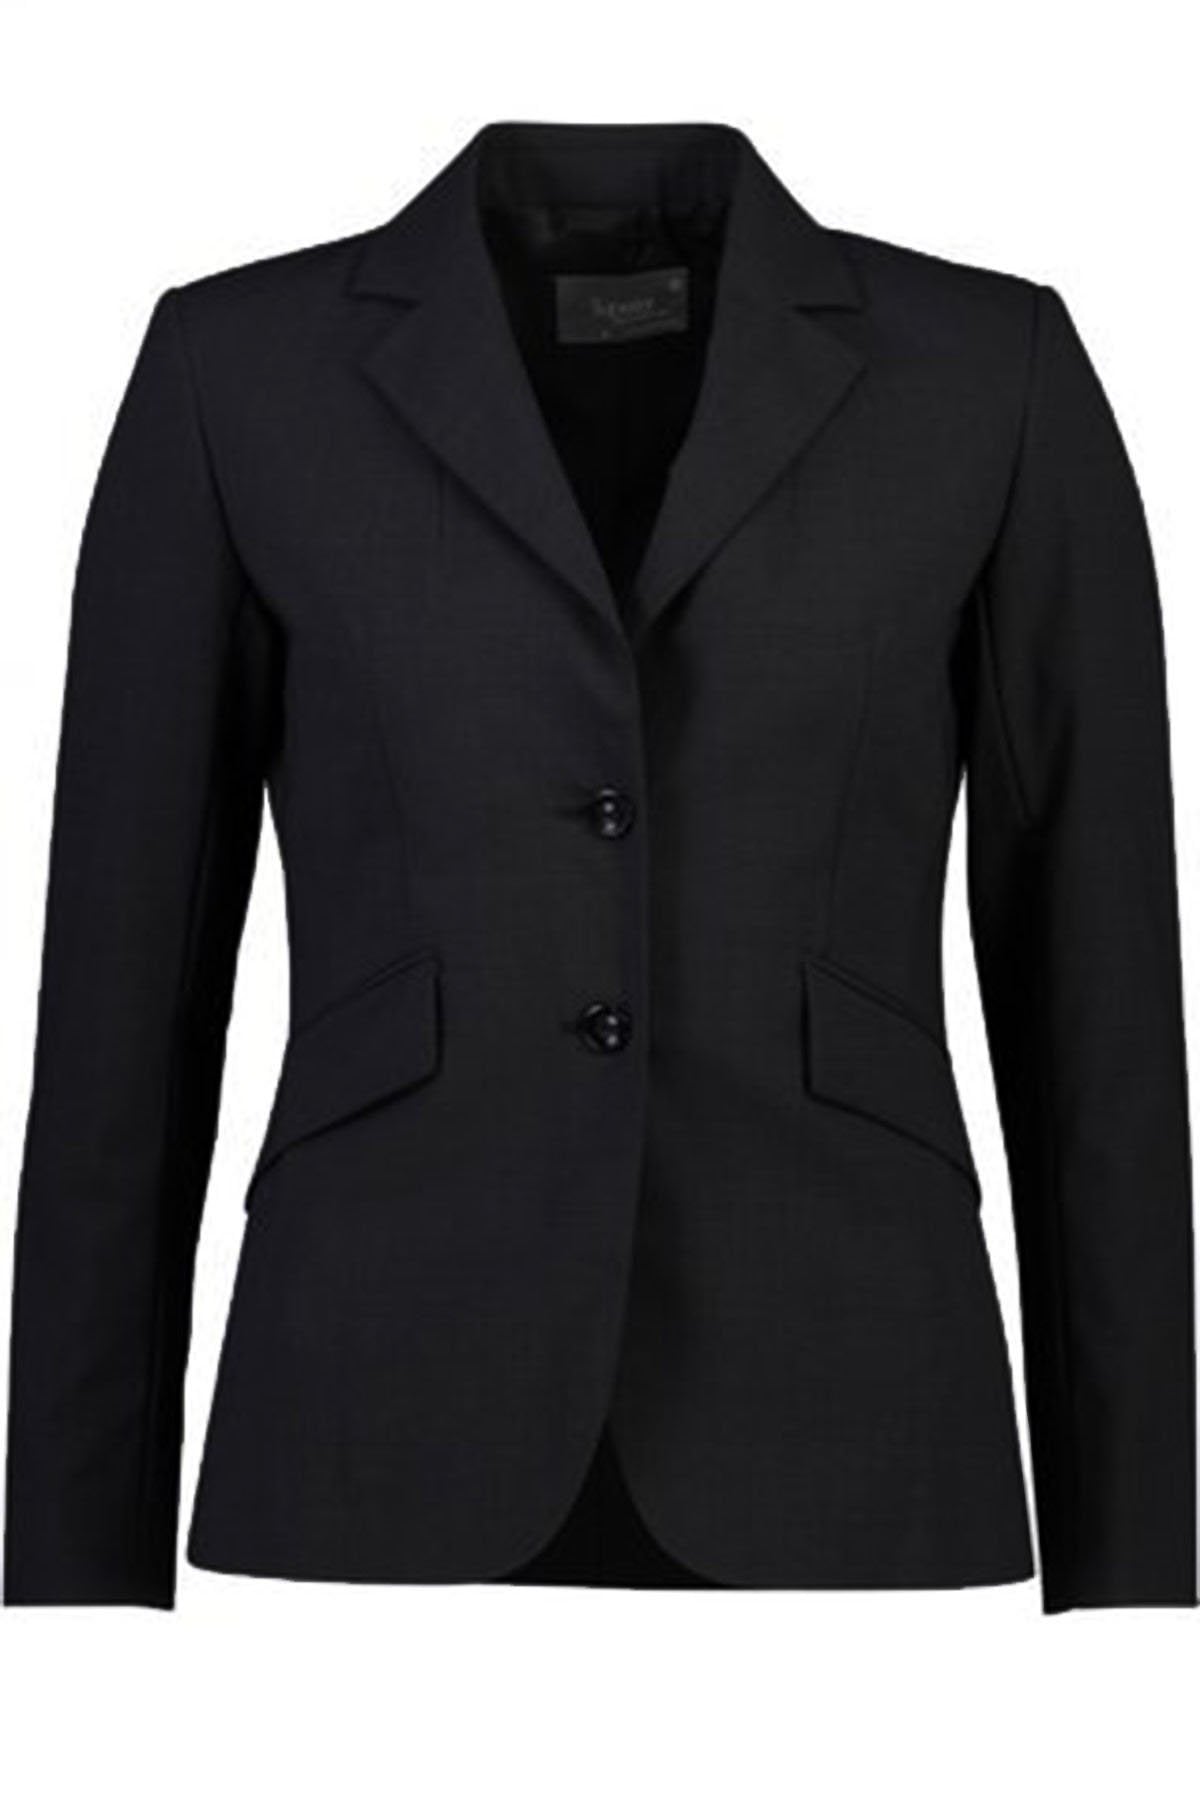 Women's 2 Button Fitted Jacket